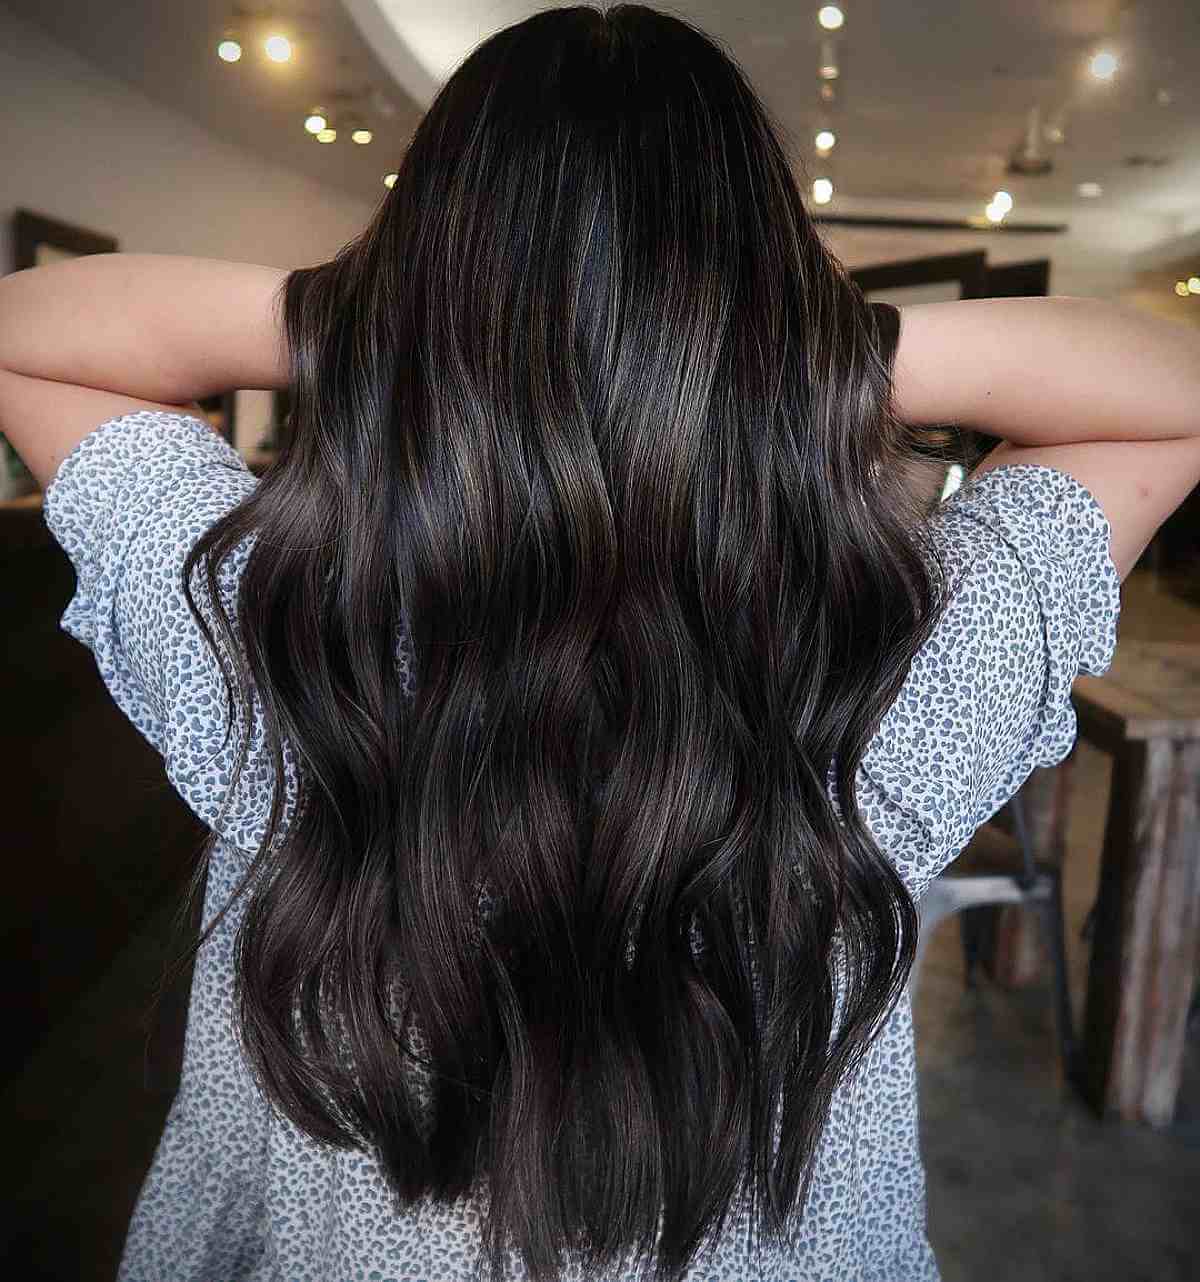 Positano Black Hair Color | Black with hints of deep cool brown